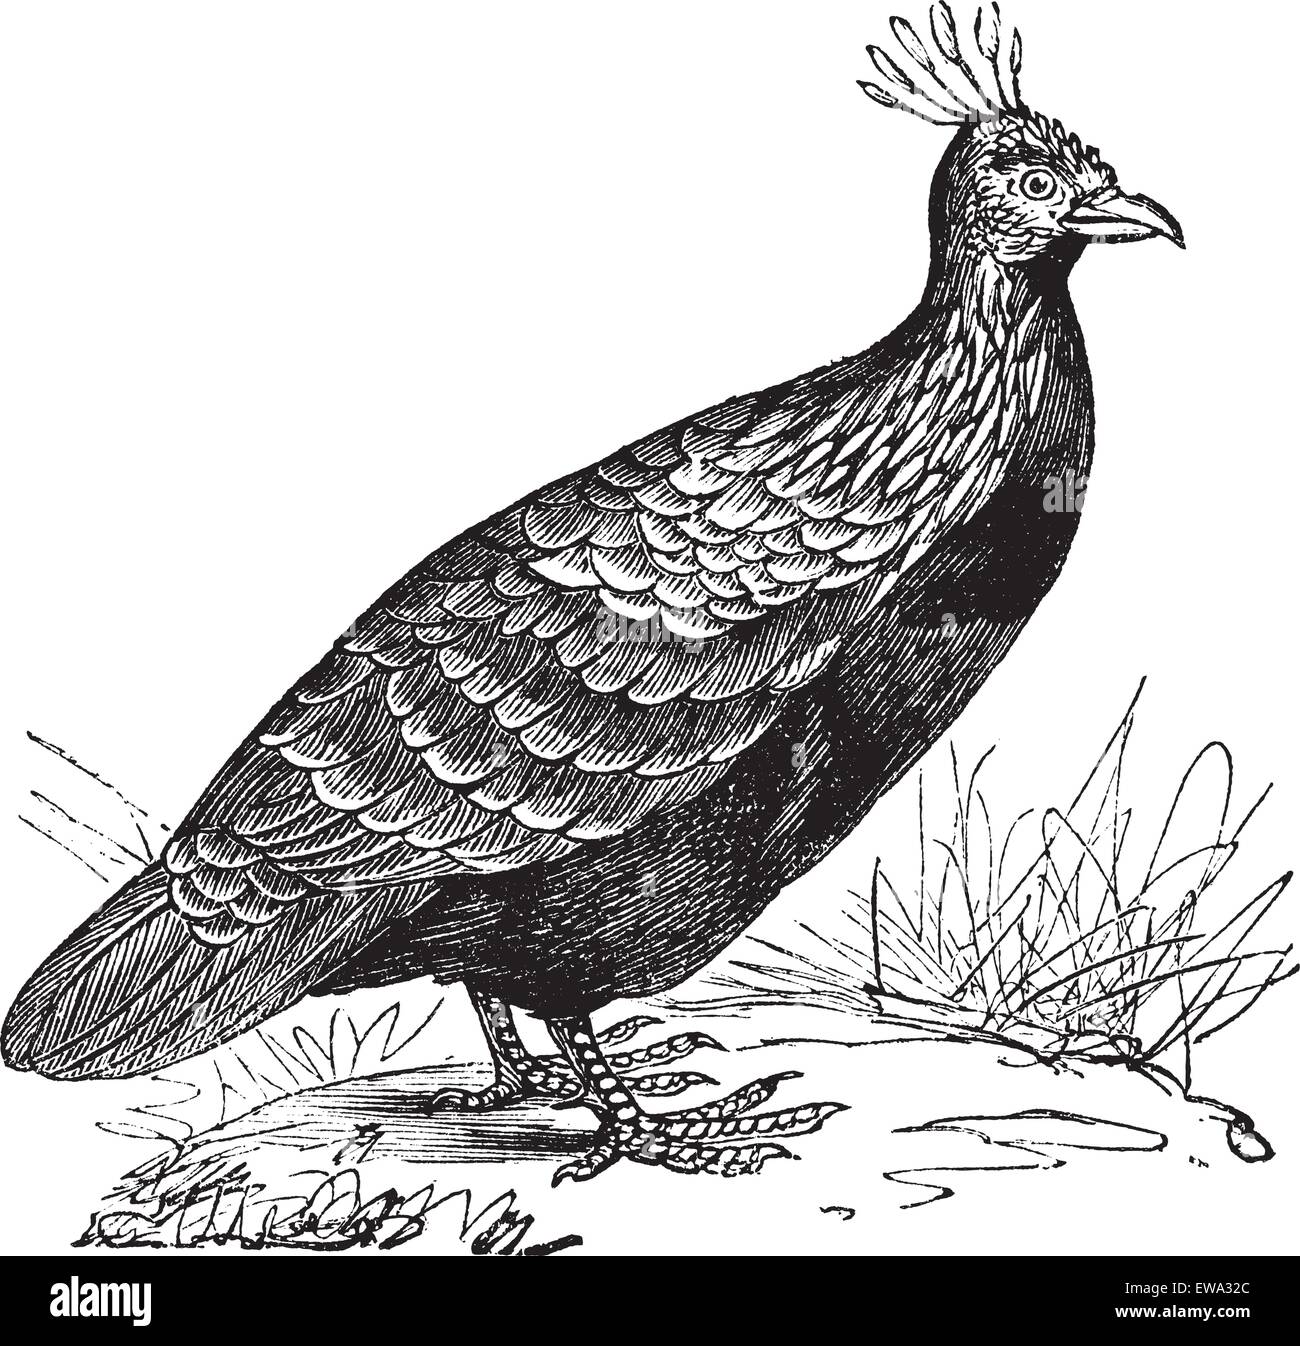 Himalayan Monal or Lophophorus impejanus or Impeyan Monal or Impeyan Pheasant or Danphe or Danfe, vintage engraving. Old engraved illustration of Himalayan Monal (Male) in the meadow. Stock Vector